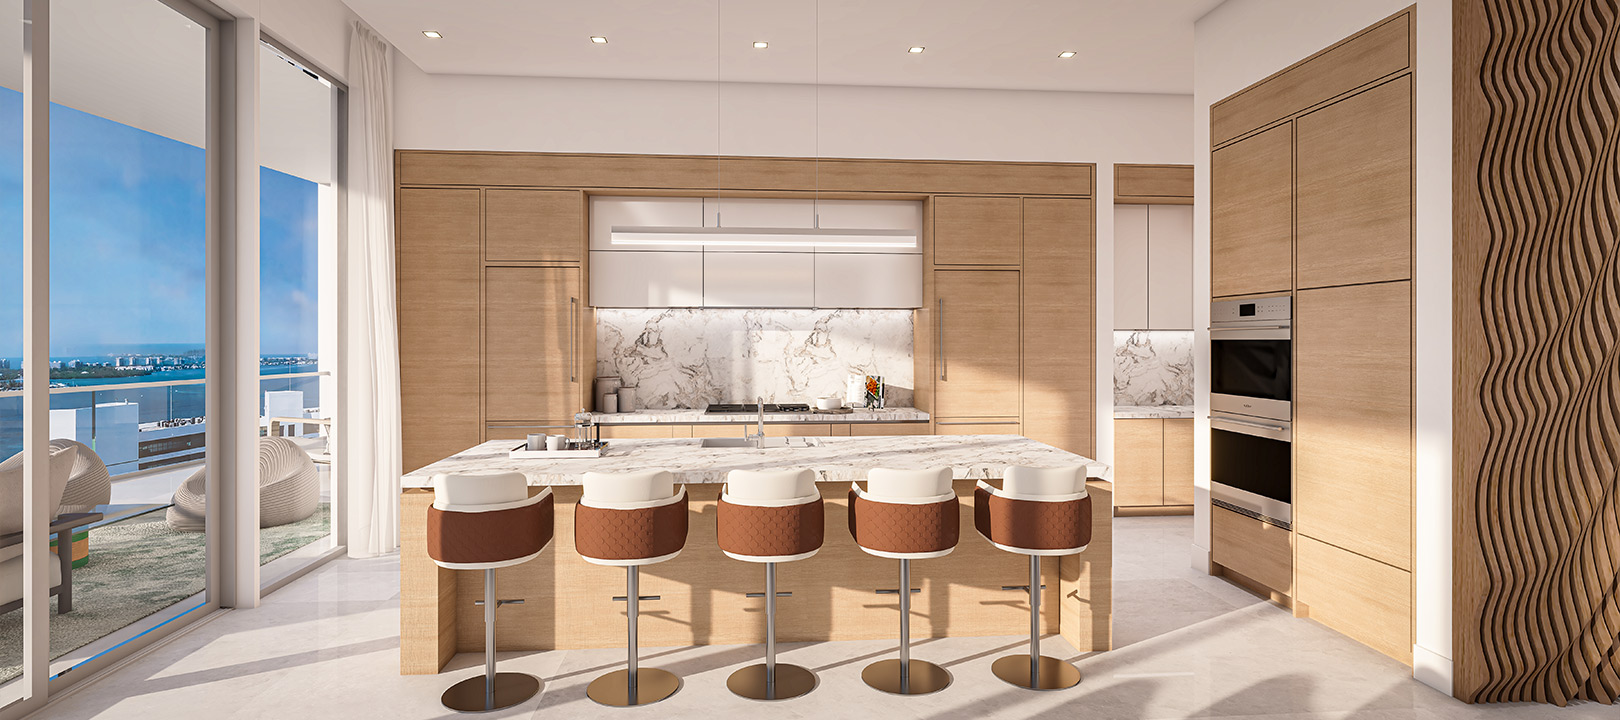 interior rendering of penthouse g kitchen